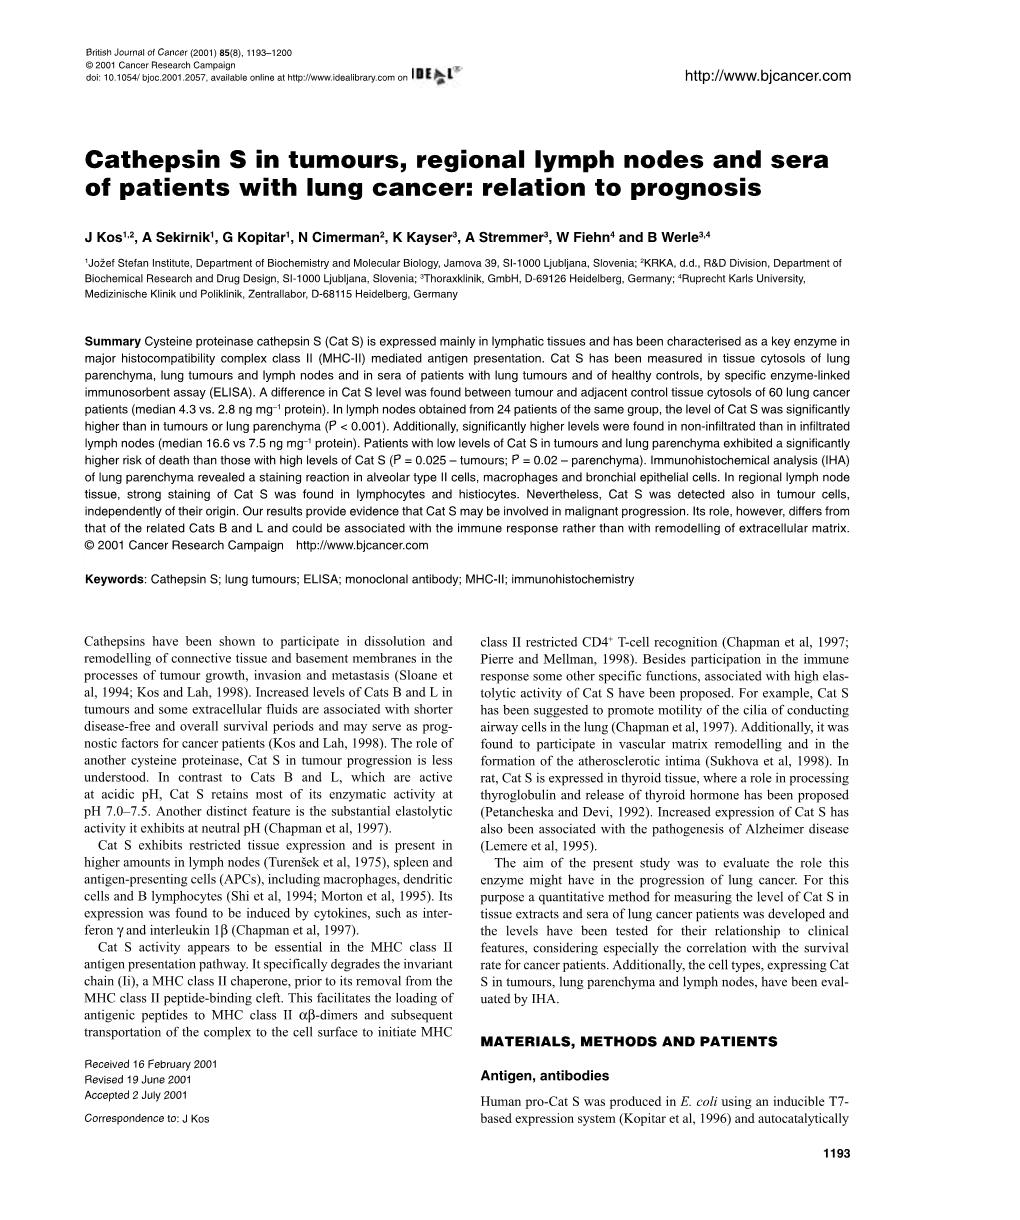 Cathepsin S in Tumours,Regional Lymph Nodes and Sera of Patients